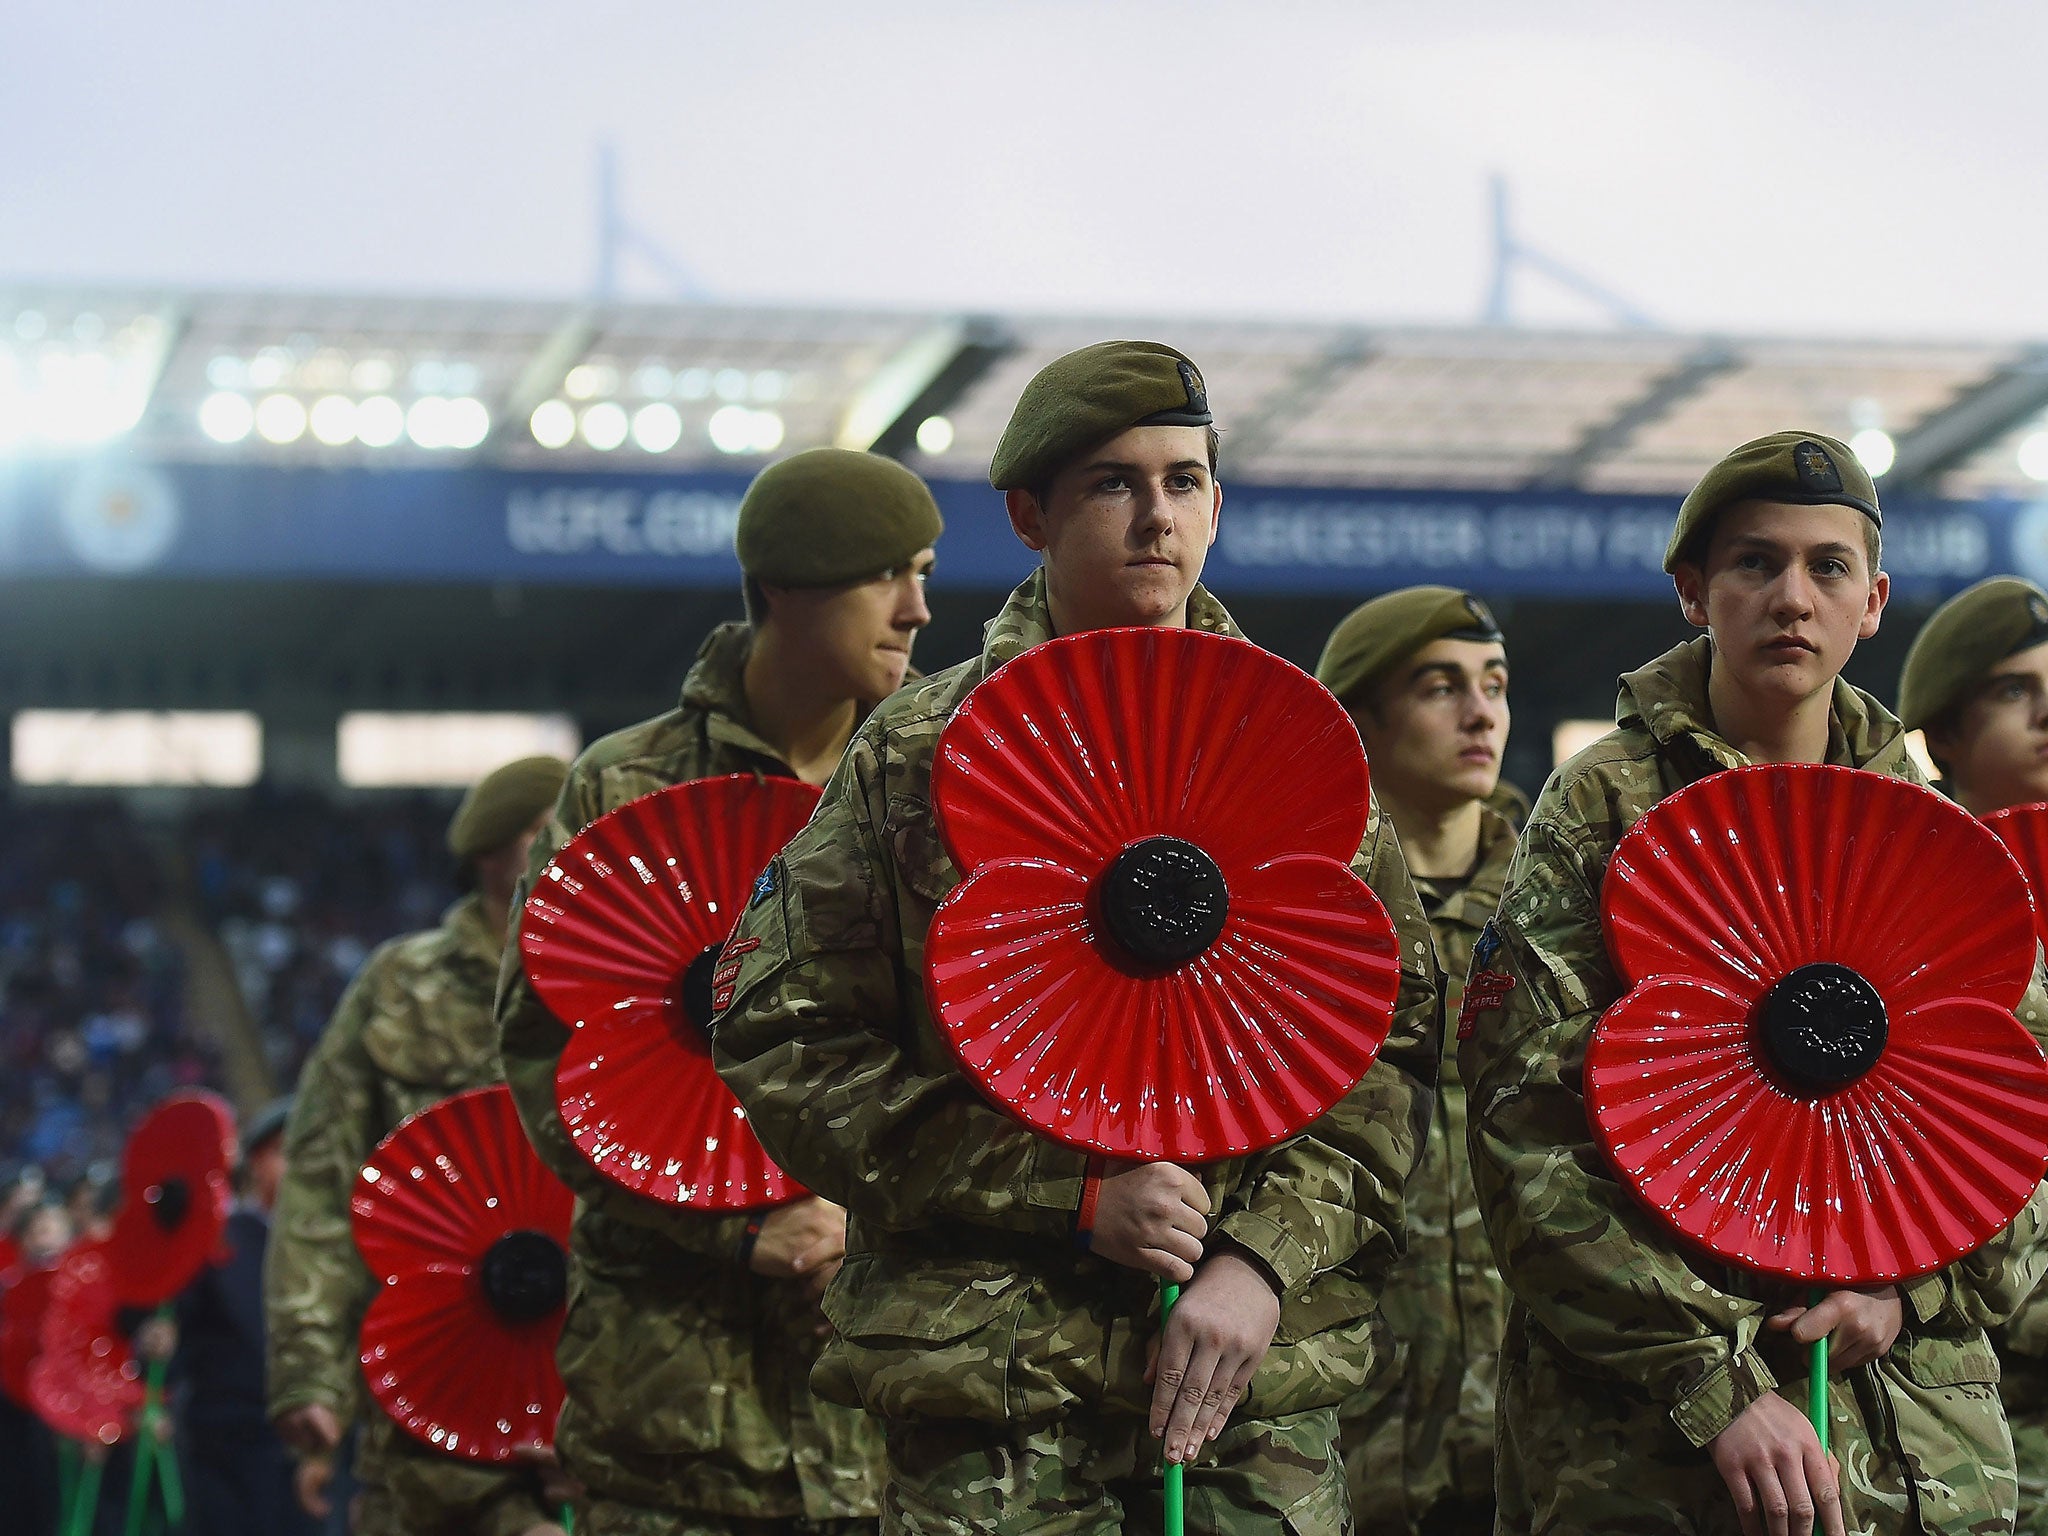 The FA is in discussions with Fifa in an effort to allow both England and Scotland players to wear poppies on their shirts when they play each other at Wembley on Armistice Day